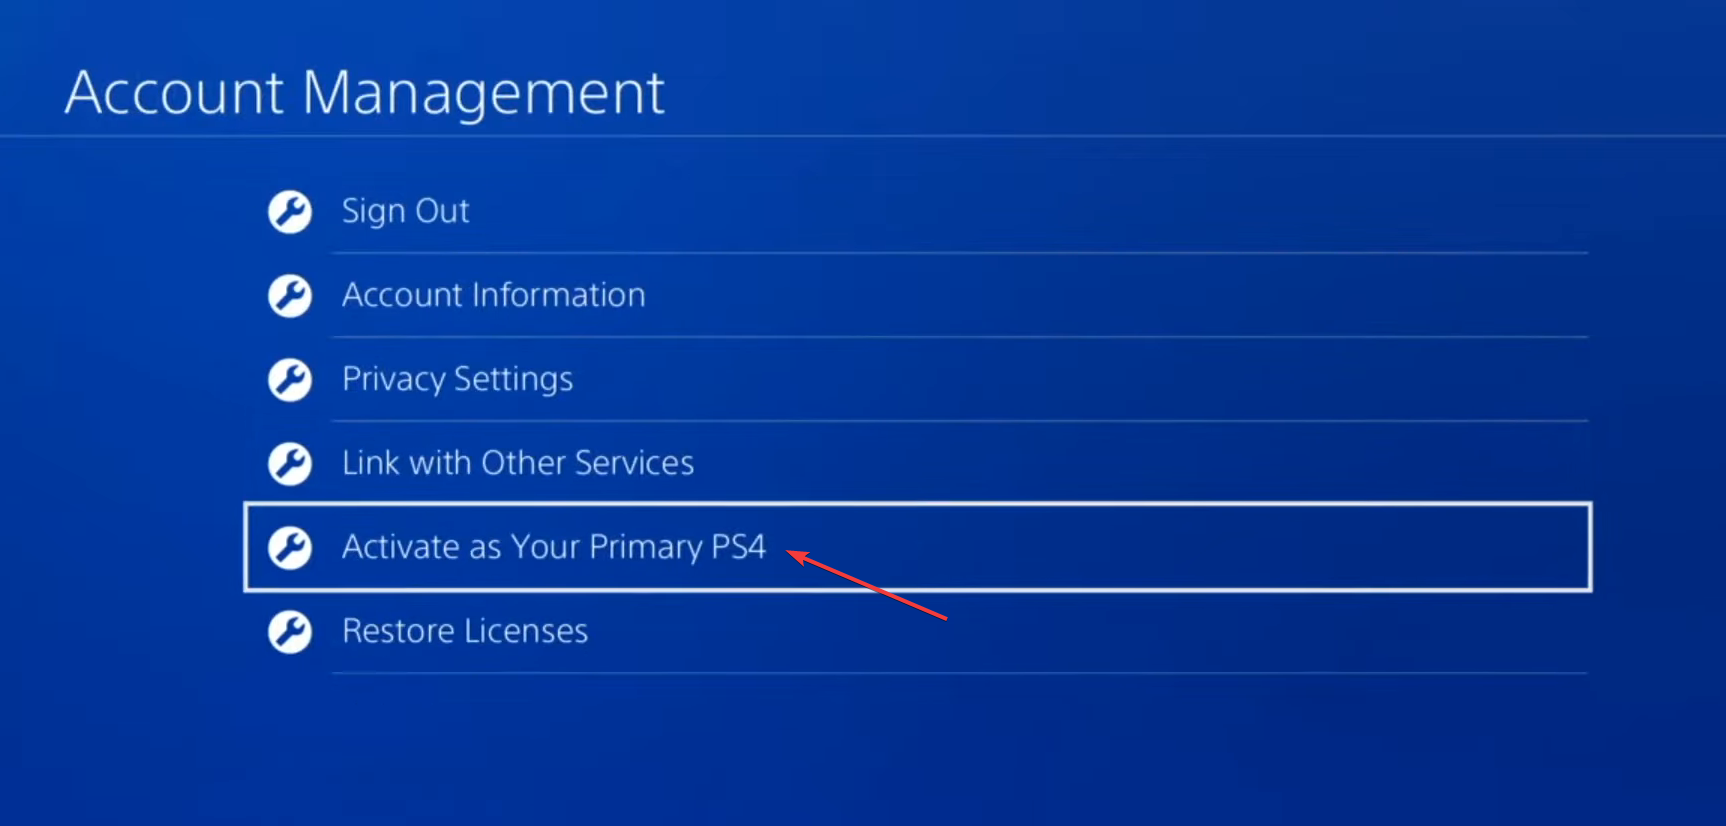 activate as your primary PS4